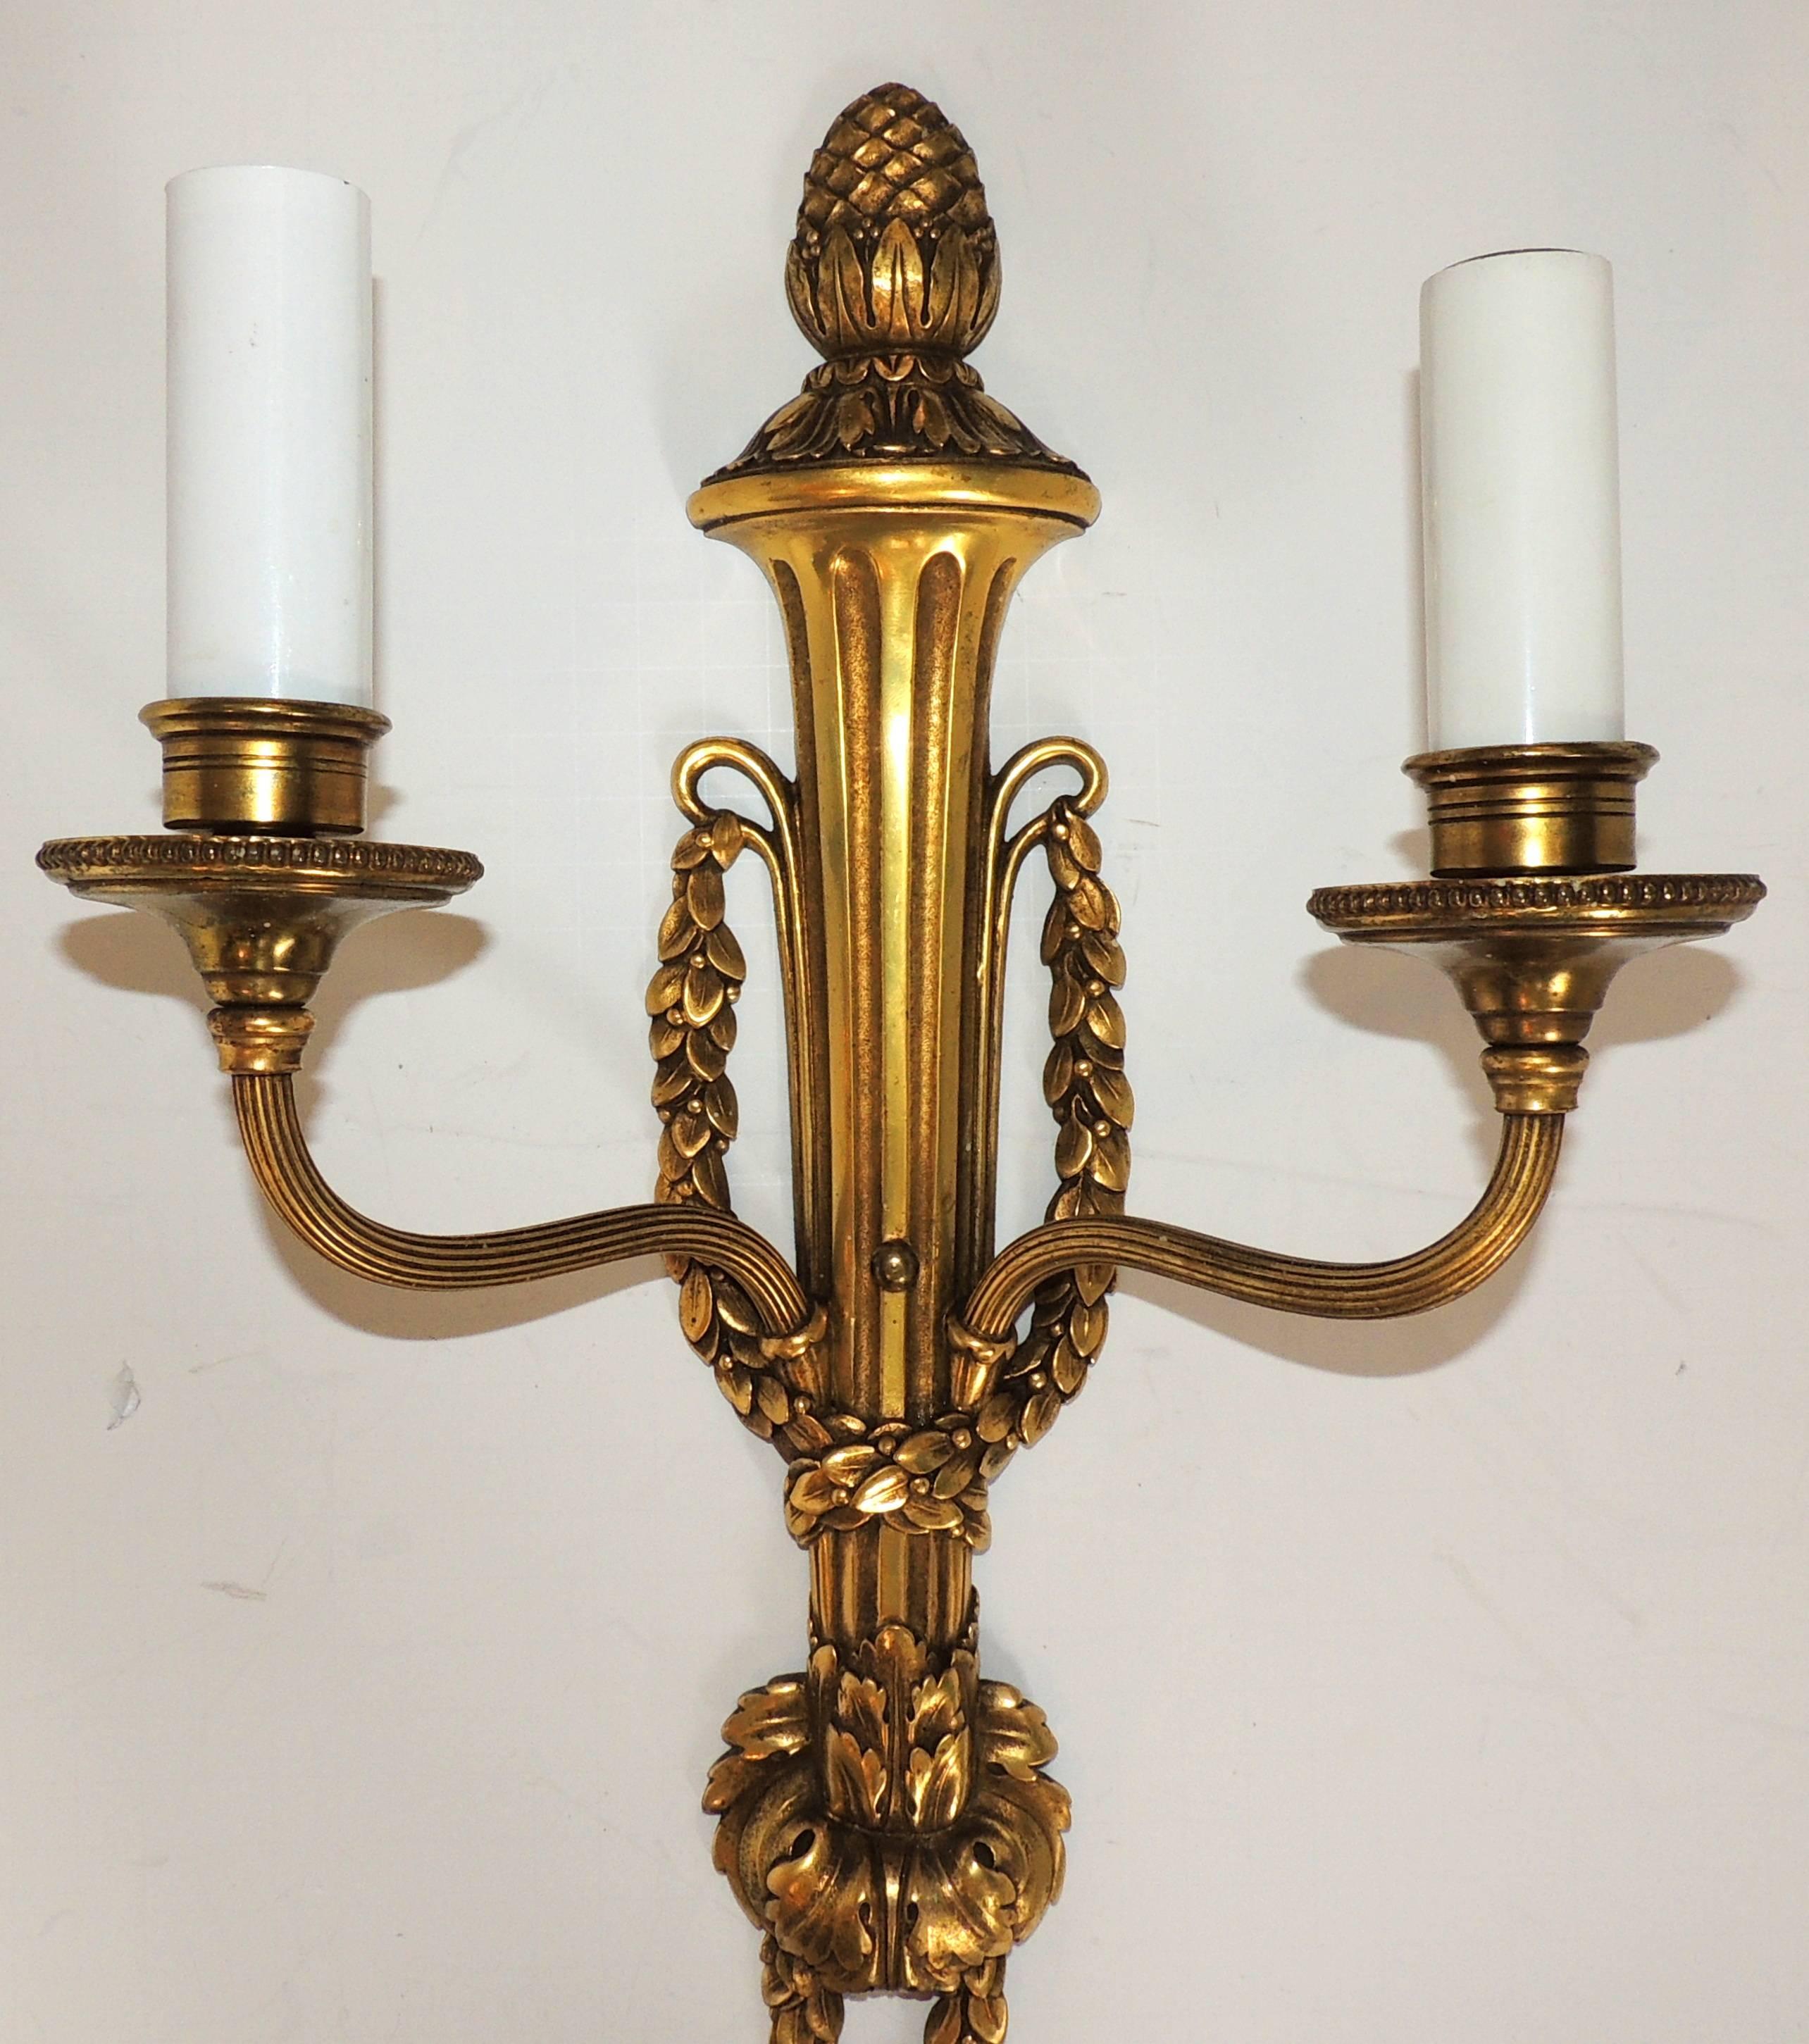 A Handsome Pair Of Stamped E.F. Caldwell Two-Arm Brass / Bronze Wreath Urn Top Neoclassical, Regency Wall Sconces, Rewired With Up To 60 Watt Edison Bulbs And Come Ready To Install & Enjoy.	
